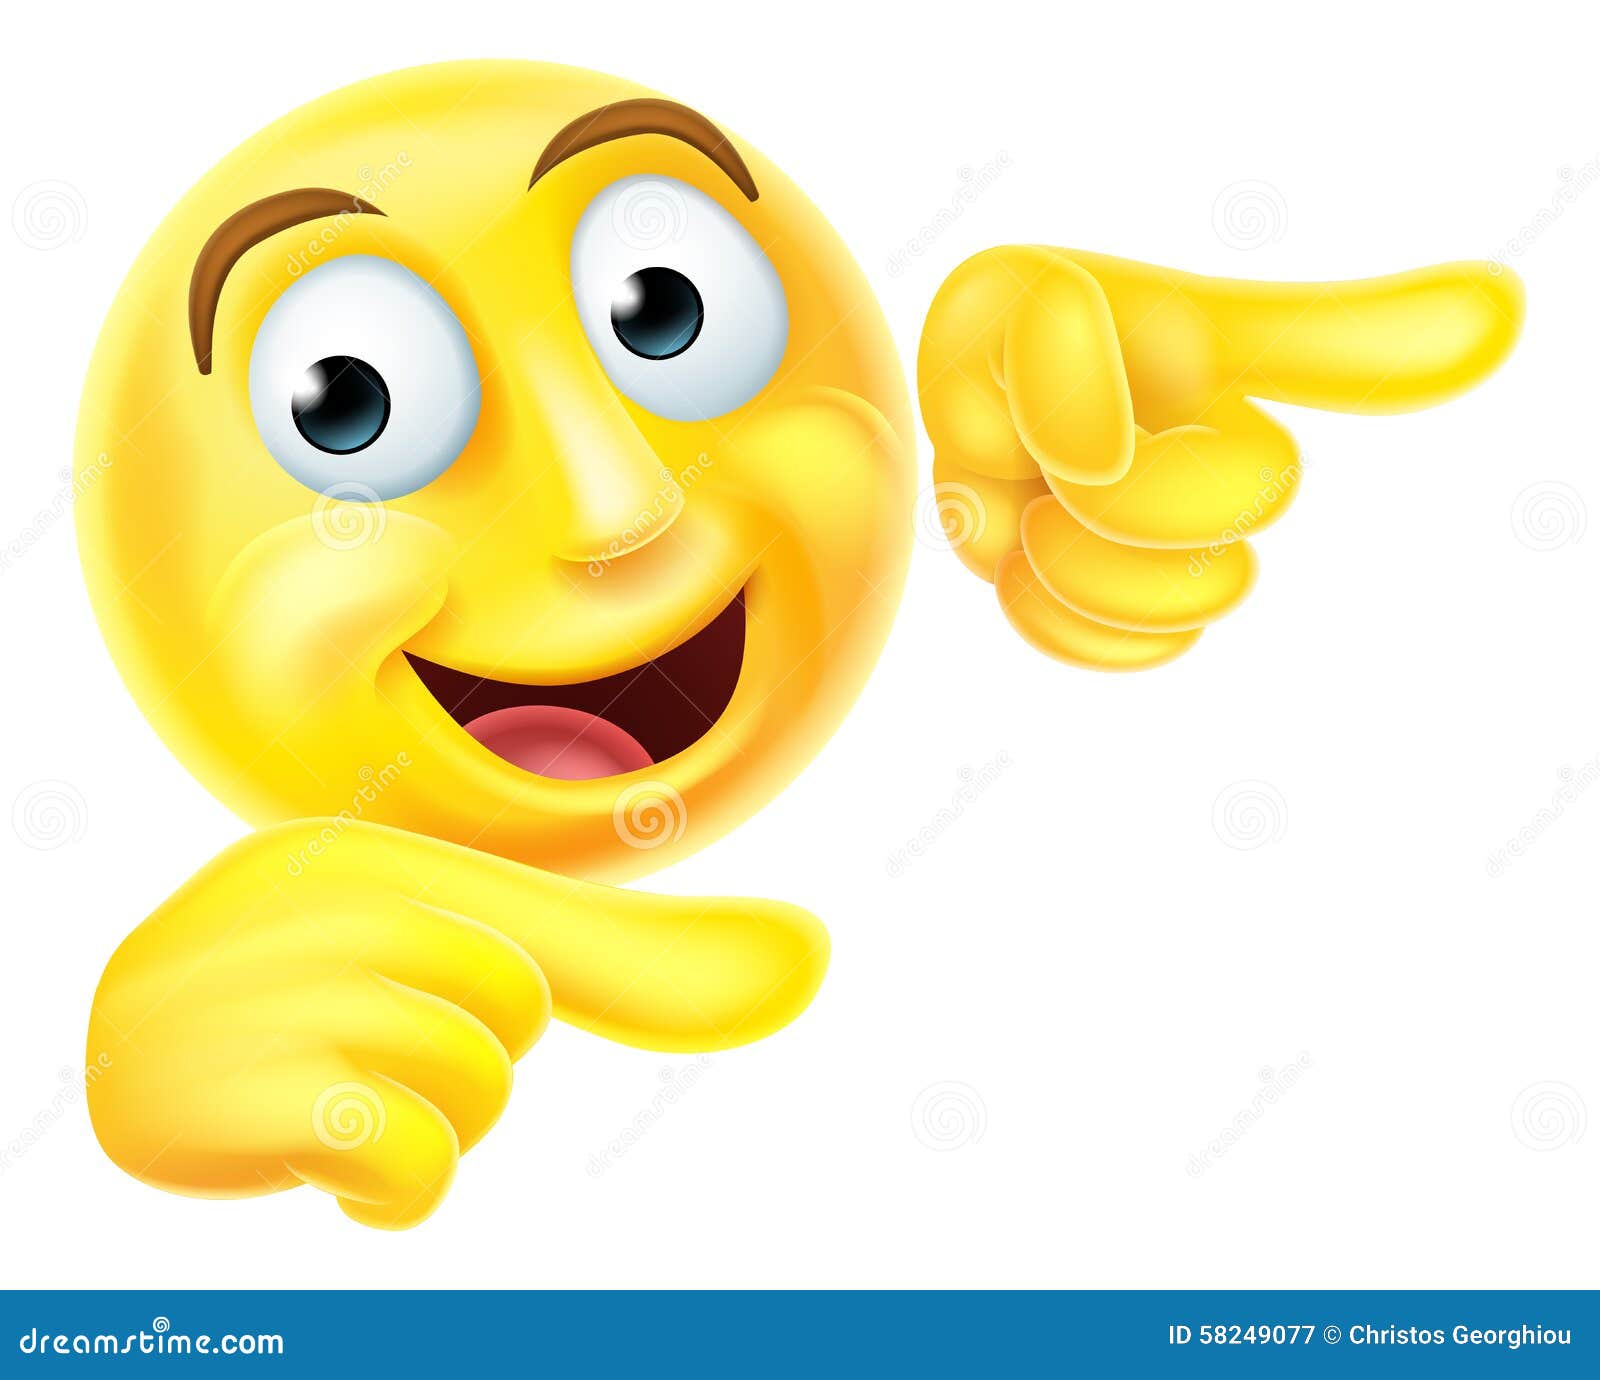 Laughing And Pointing Emoticon Stock Vector Illustration Of Humor